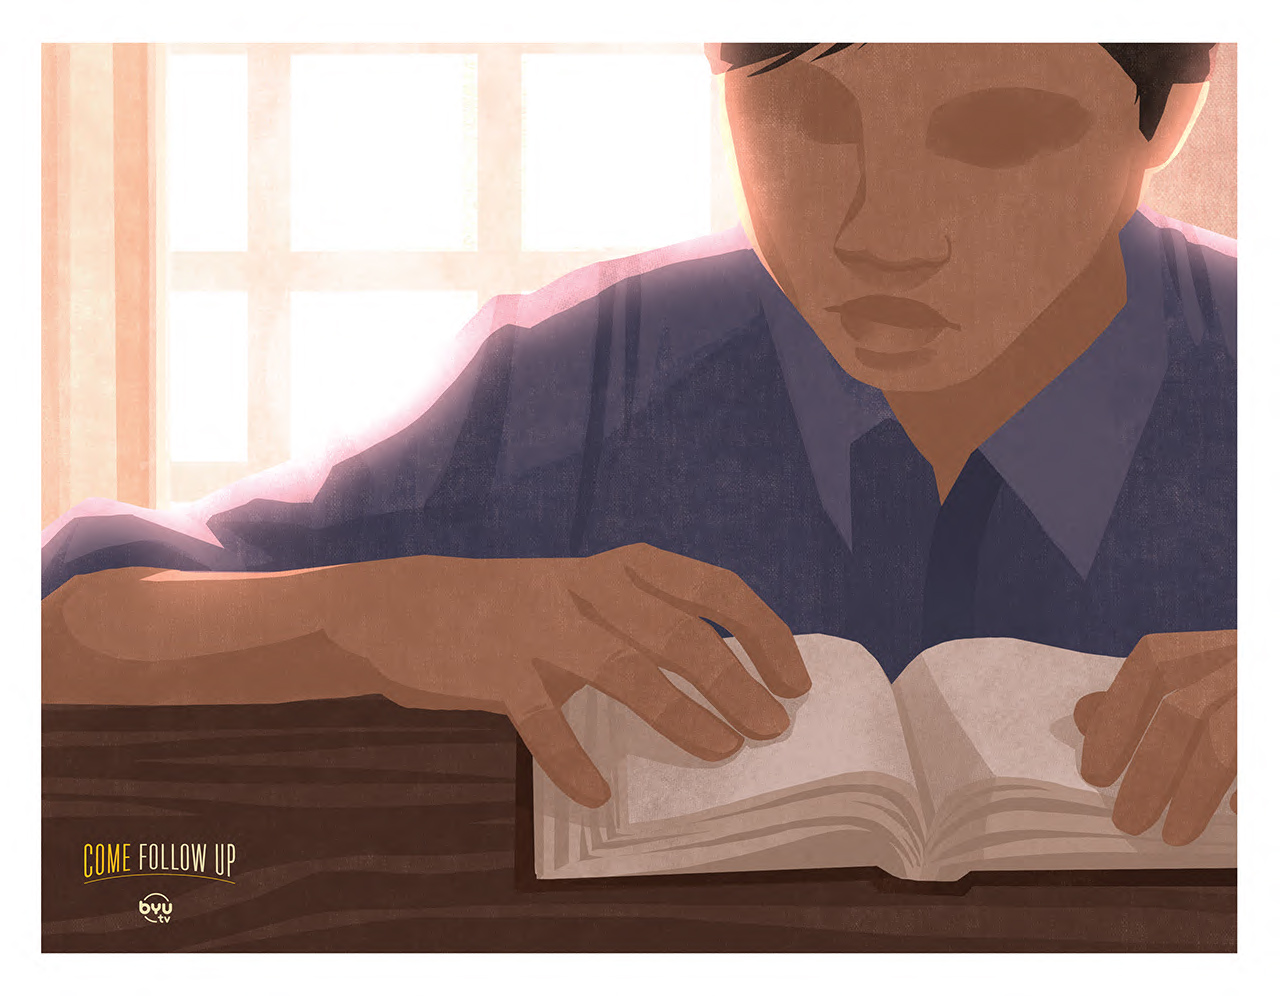 Stylized illustration of a young boy reading scriptures at a table